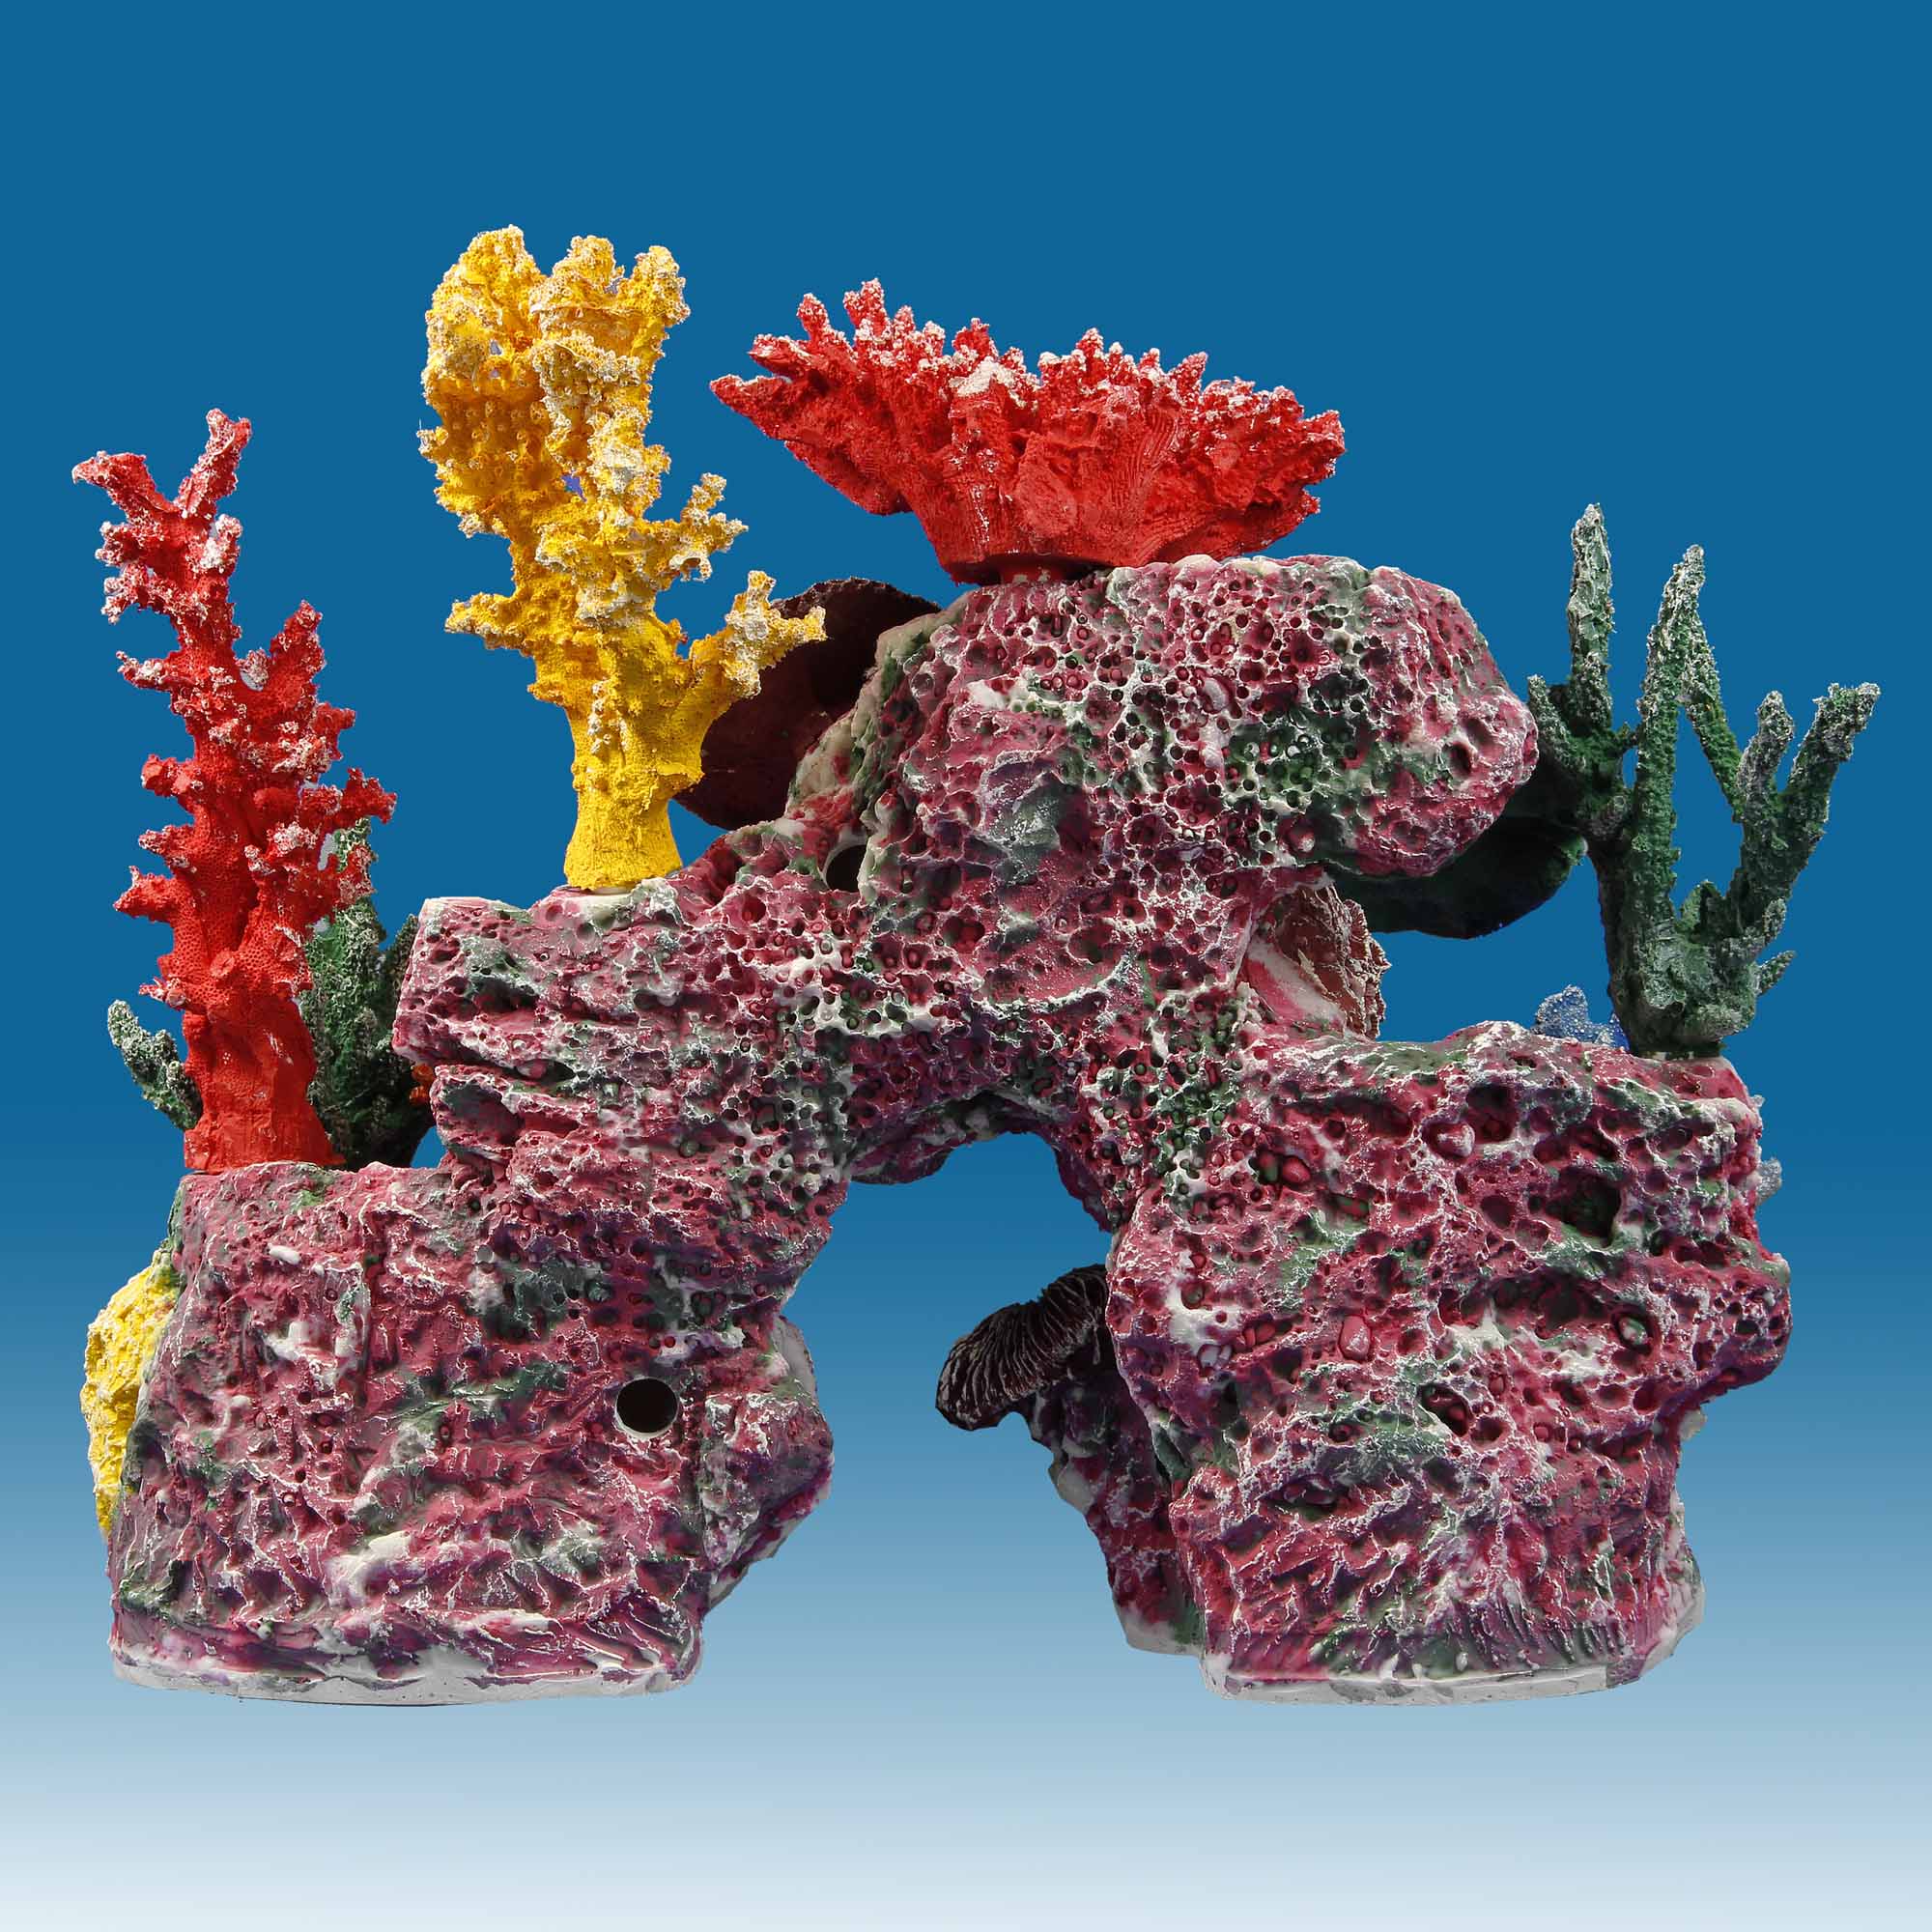 DM047PNP Medium Artificial Coral Inserts Decor, Fake Coral Reef Decorations  for Colorful Freshwater Fish Aquariums, Marine and Saltwater Fish Tanks